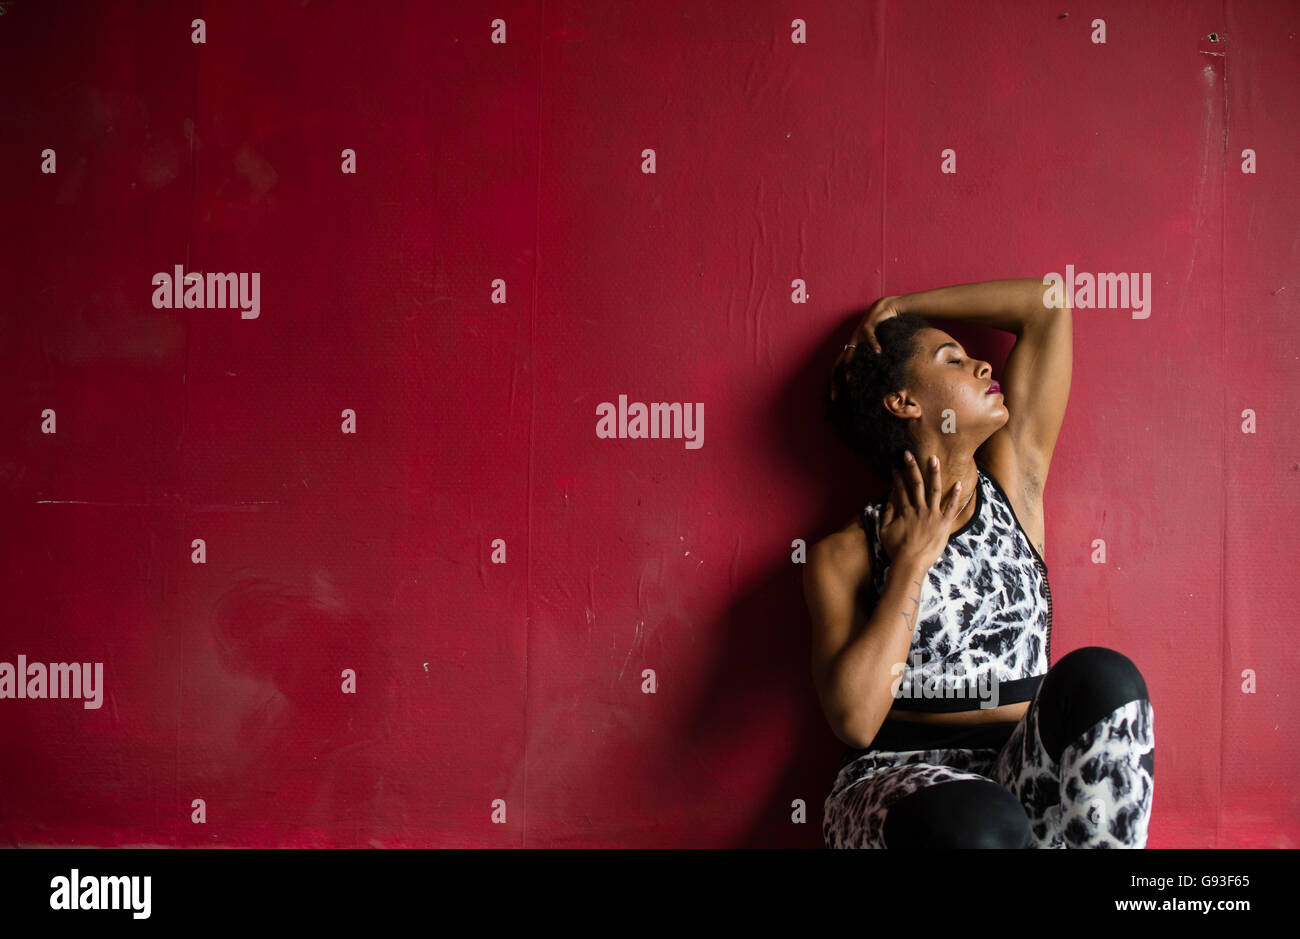 Beauty in dereliction : Fashion photography of a young afro-caribbean woman girl alone in a  red walled room  wearing fitness-style clothes, looking hot, sultry and moody Stock Photo